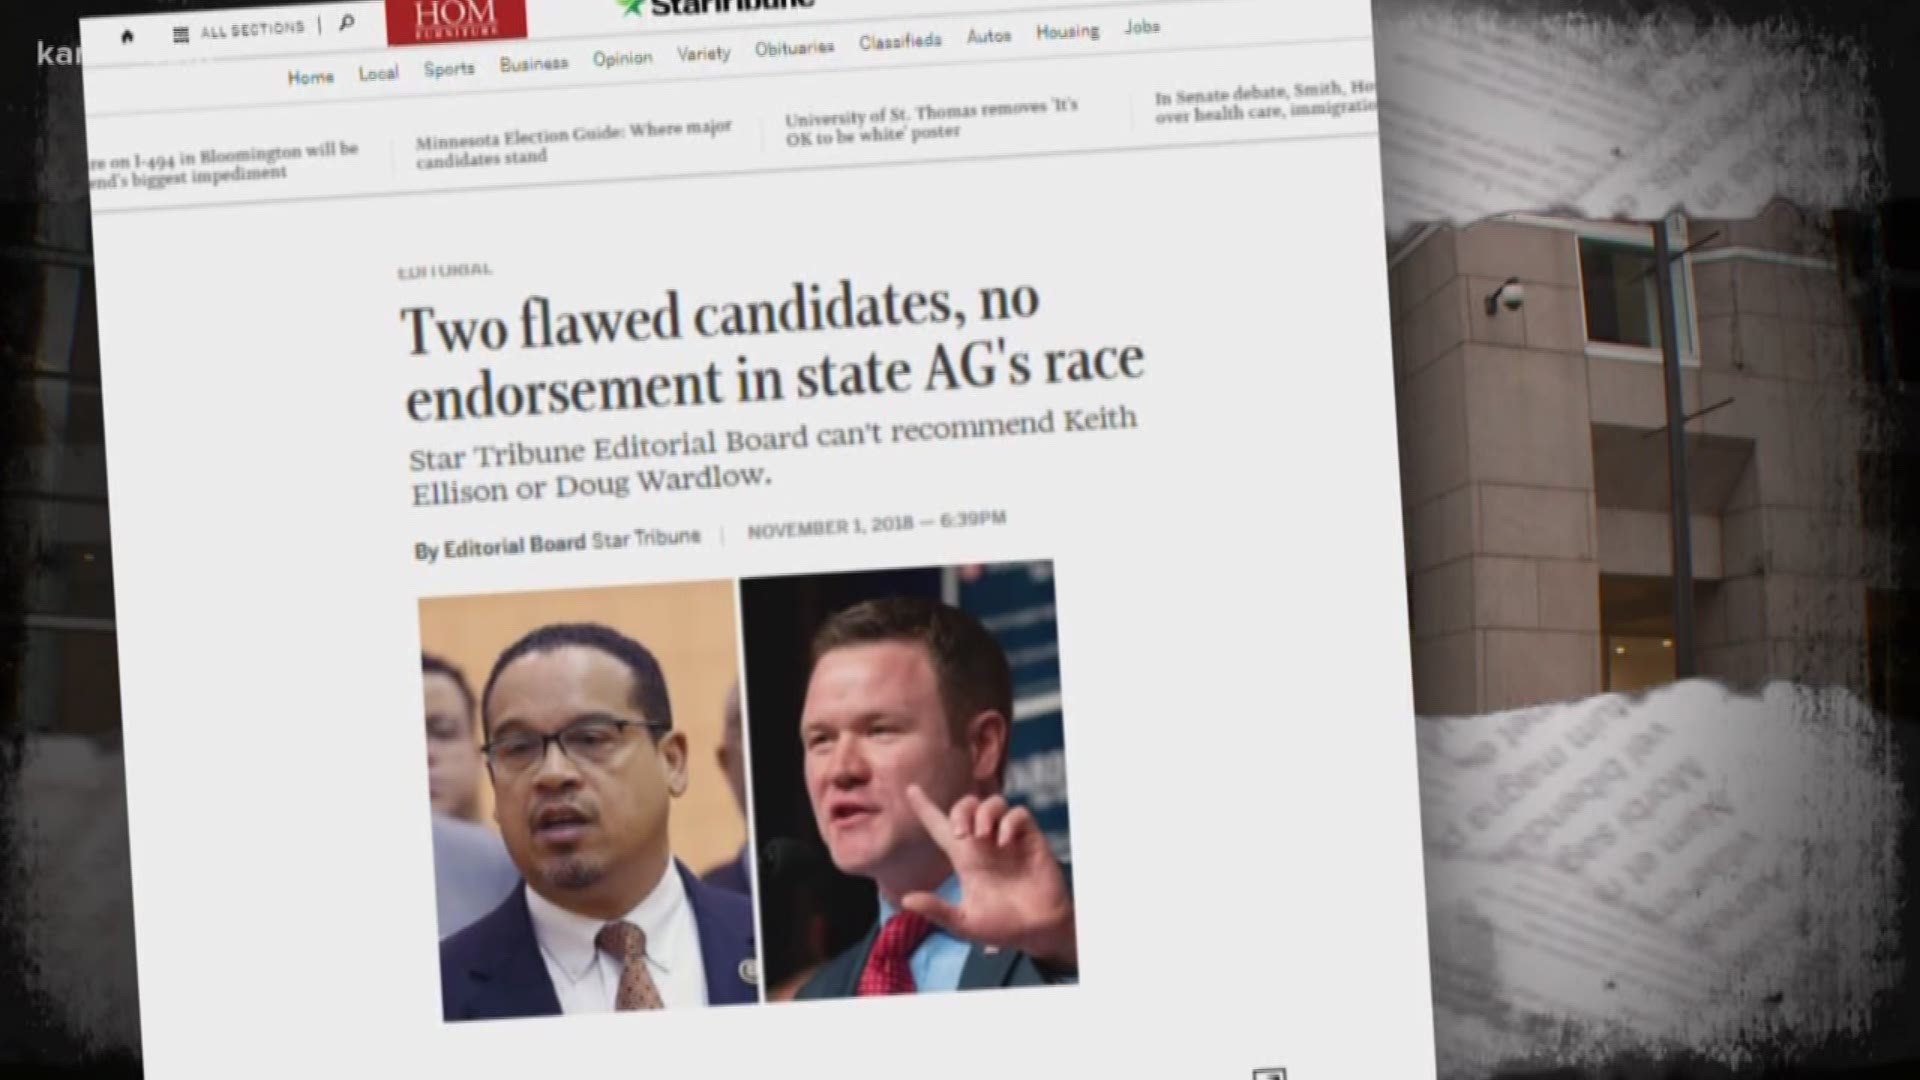 Newspapers have been endorsing candidates since the early 19th century, when most were owned by political parties. Even the New York Times backed Abe Lincoln in 1860. But, a lot's changed since then, so why today?